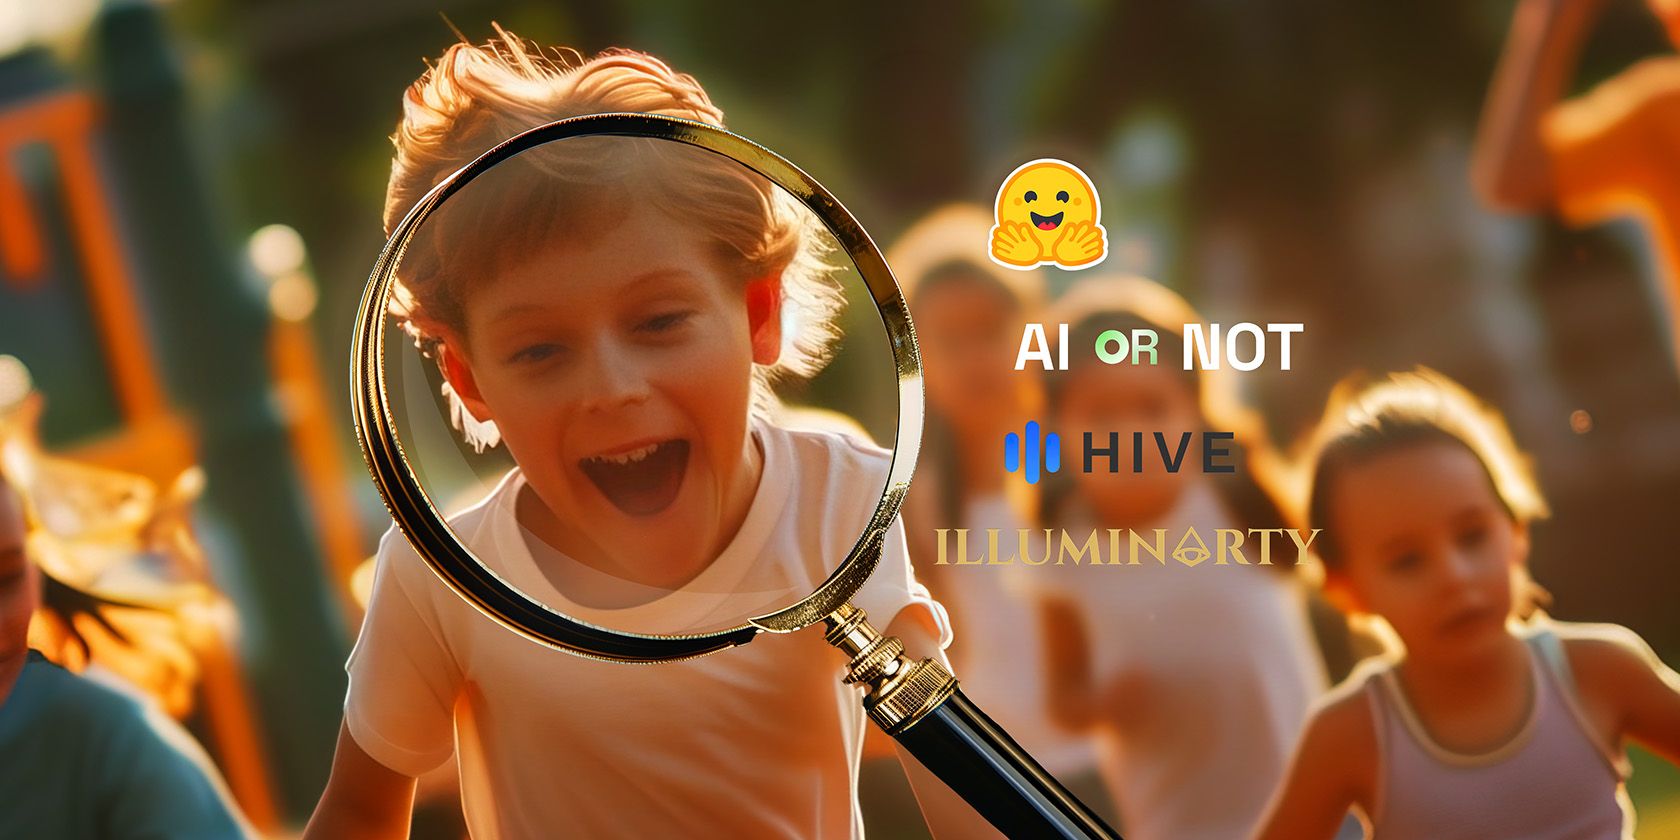 A magnifying glass focuses on a joyful child's face amidst a blurry background of running kids, with various AI-themed icons floating around